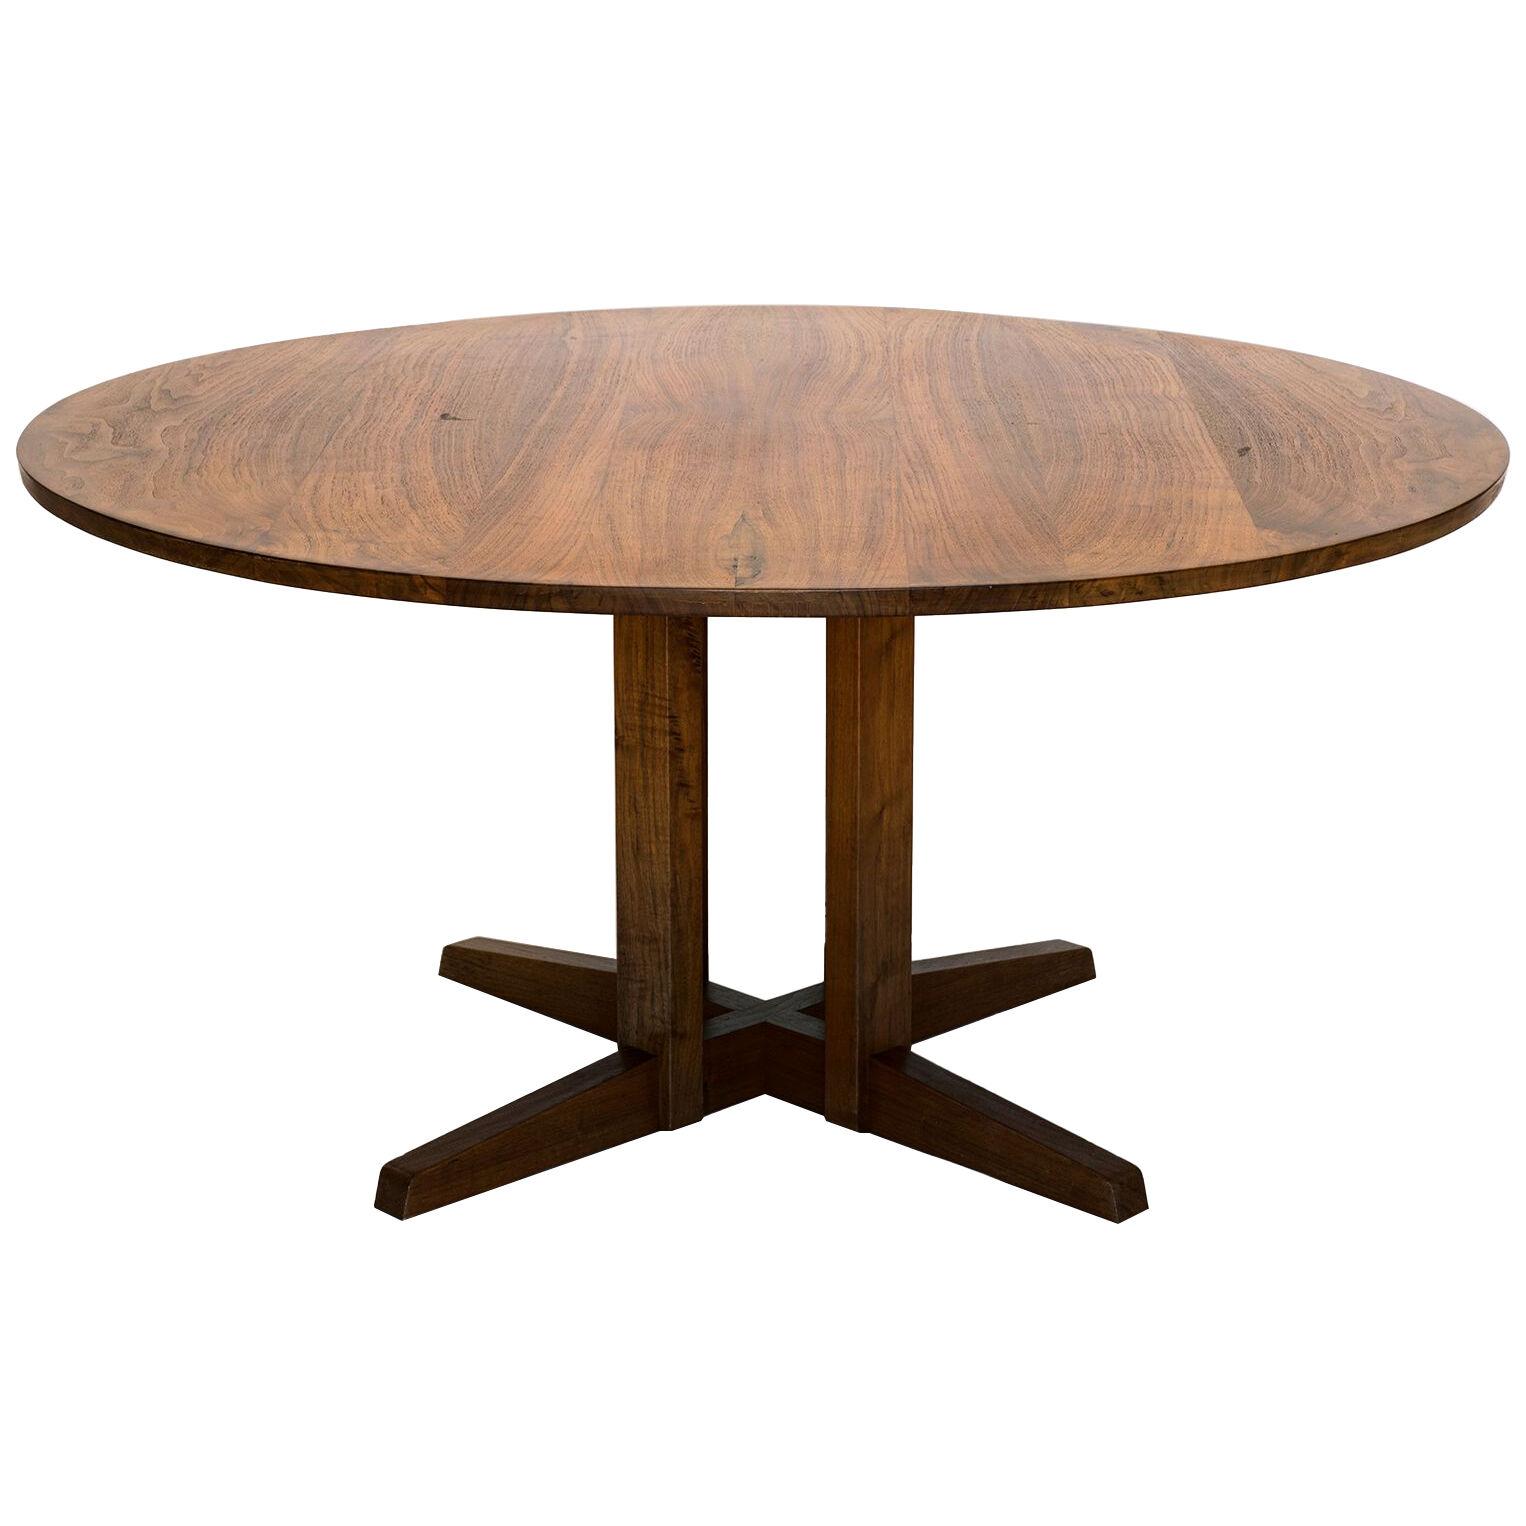 Early Cluster Base Dining Table by George Nakashima, 1958